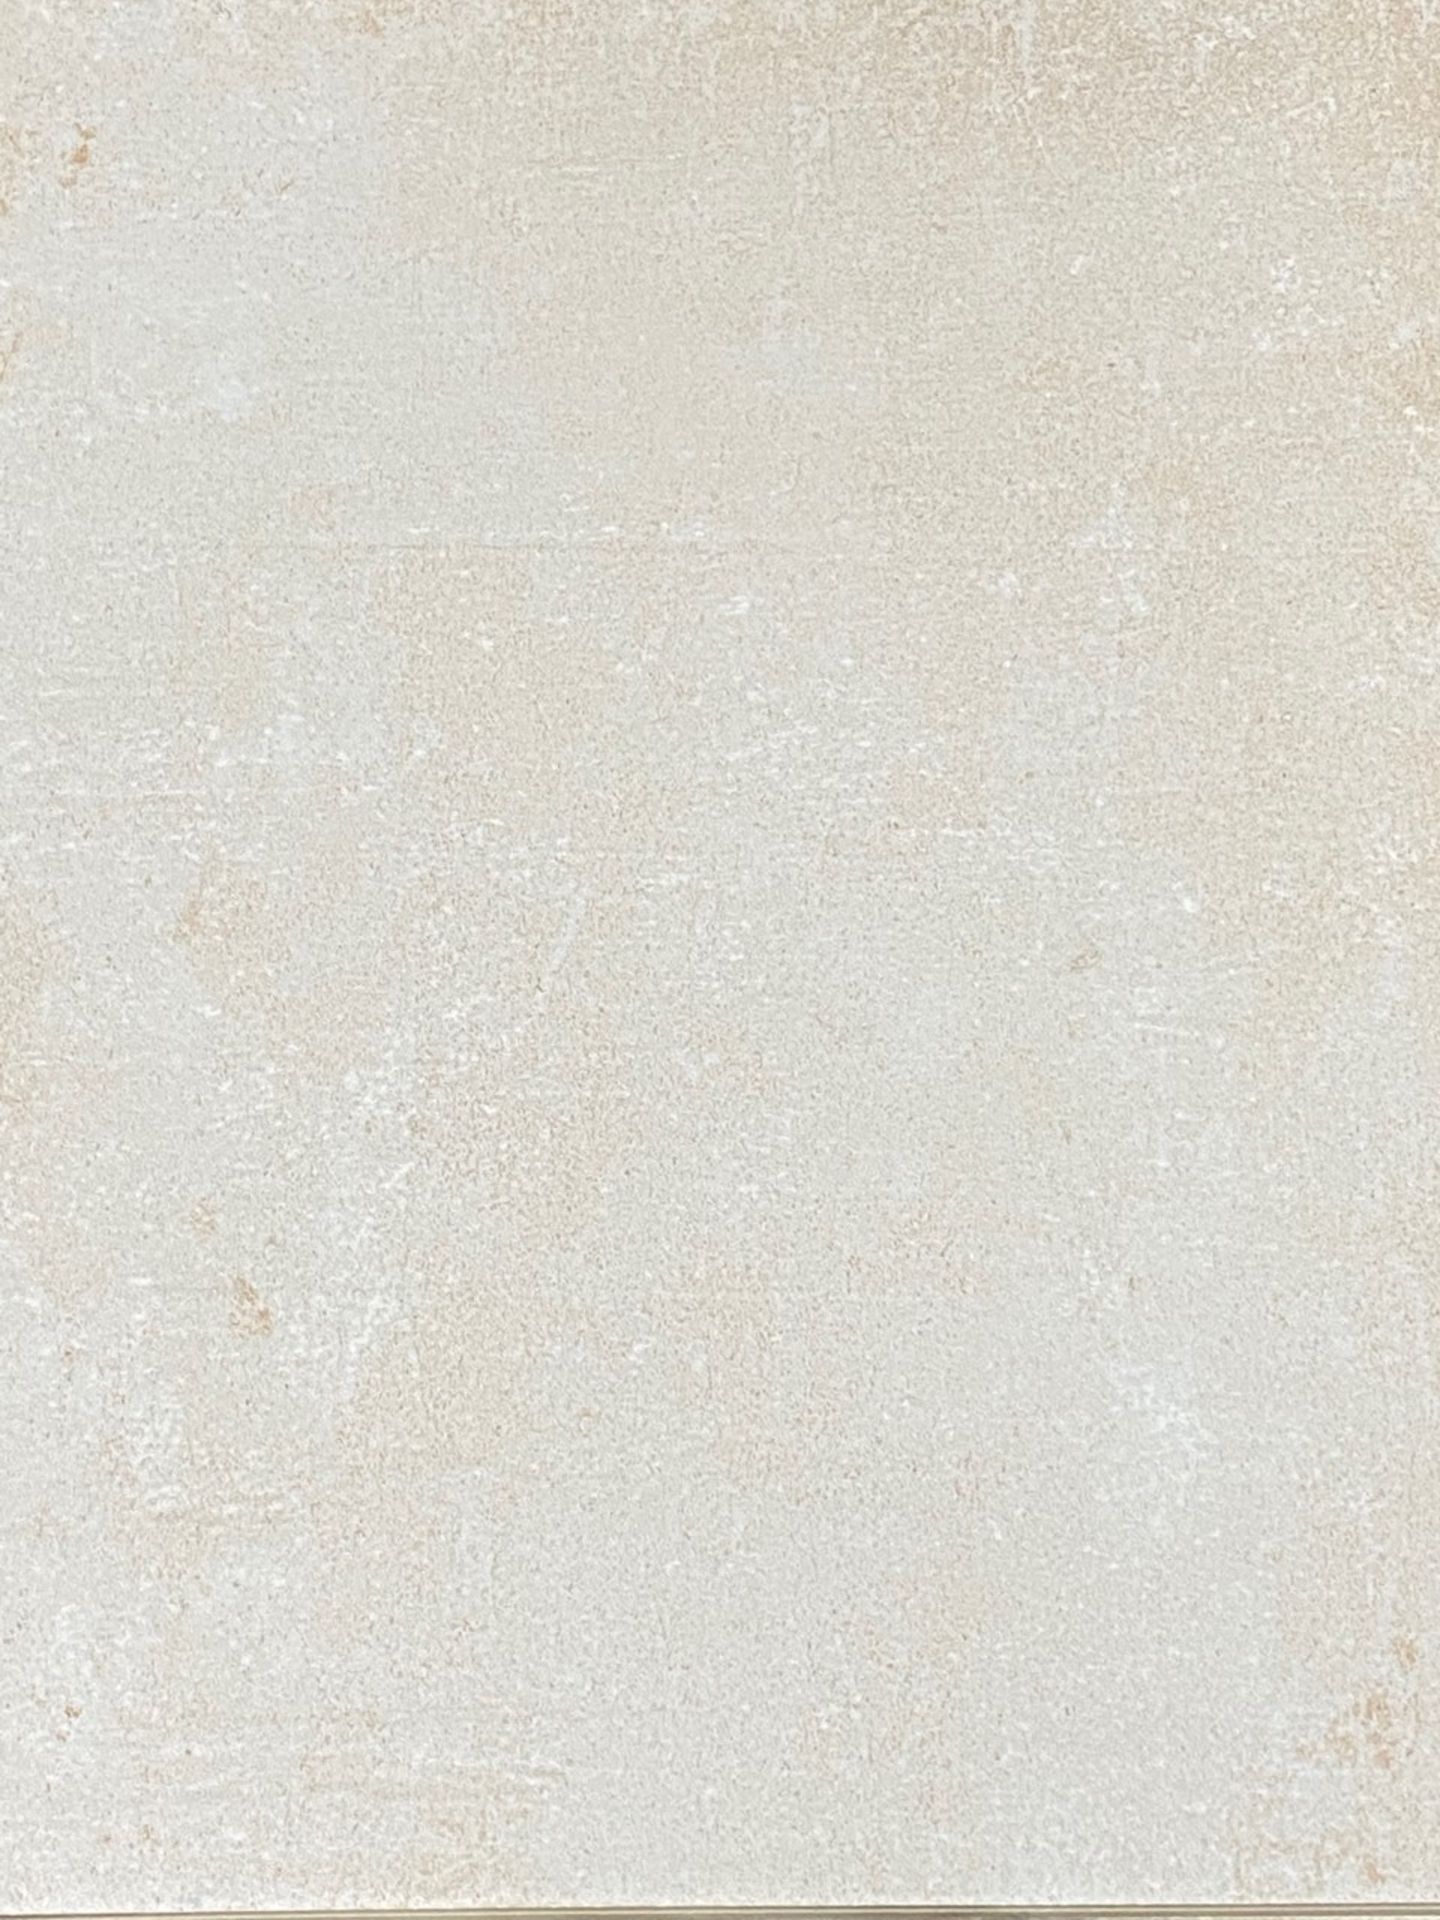 27.4 Square Meters of Porcelanosa Newport Beige Wall and Floor Tiles. 44.3x44.3cm per tile. 1.37m2 - Image 2 of 4